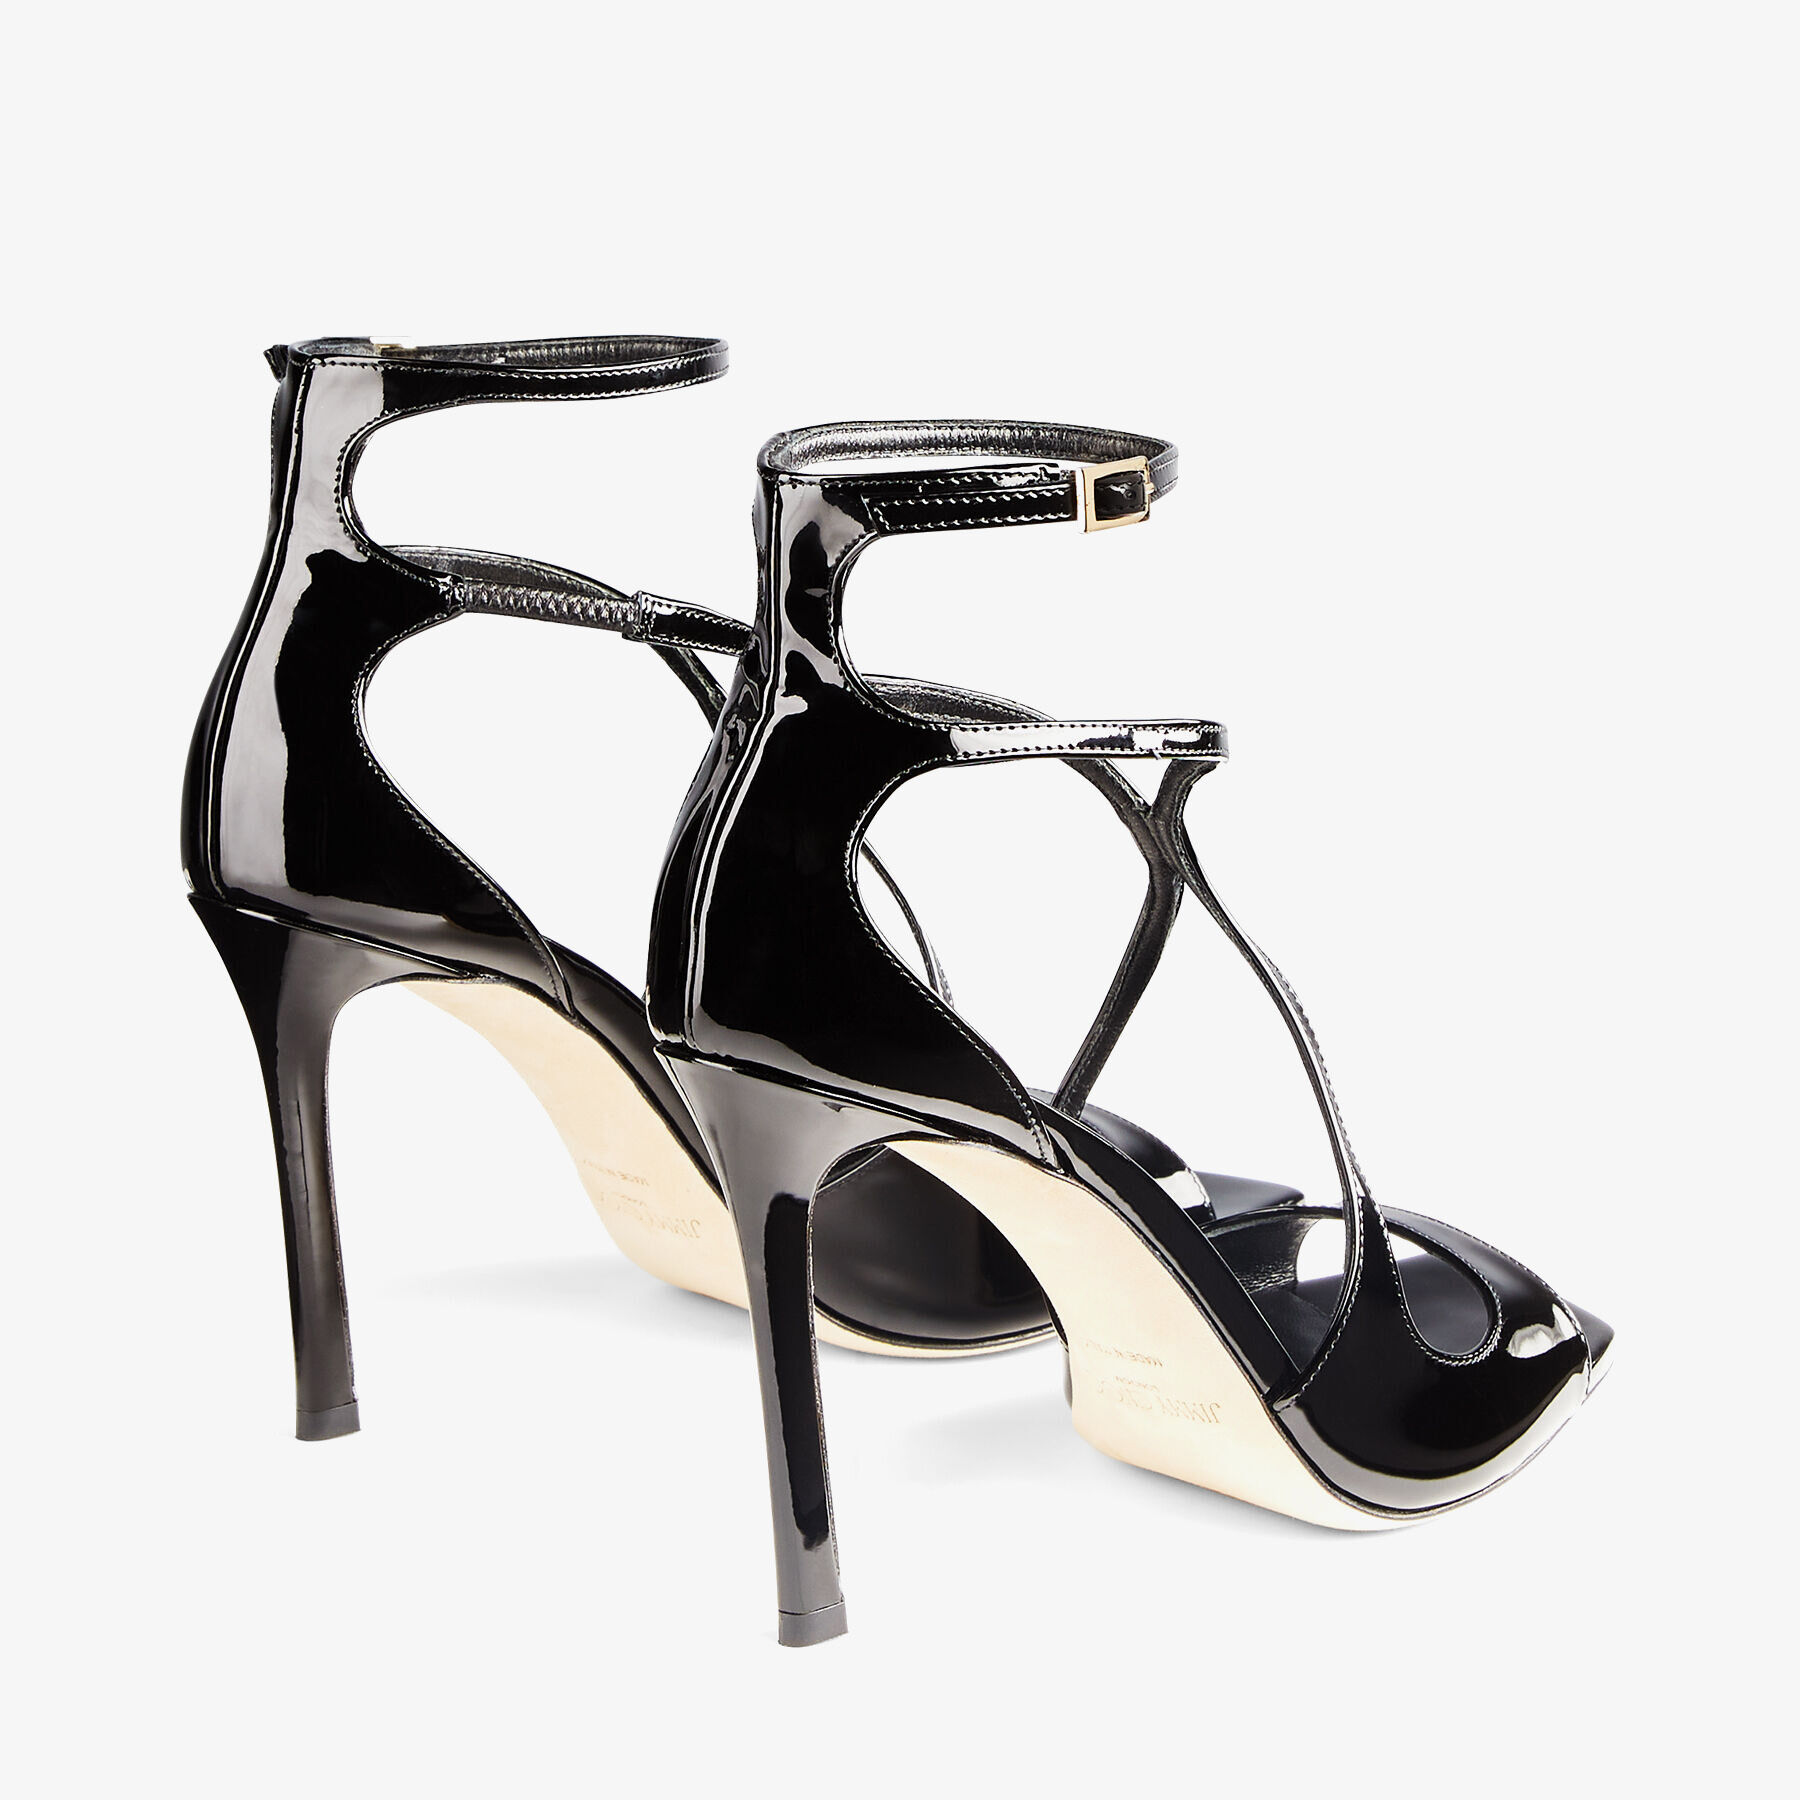 Black Patent Leather Sandals | AZIA 95 | Spring 2022 Collection 